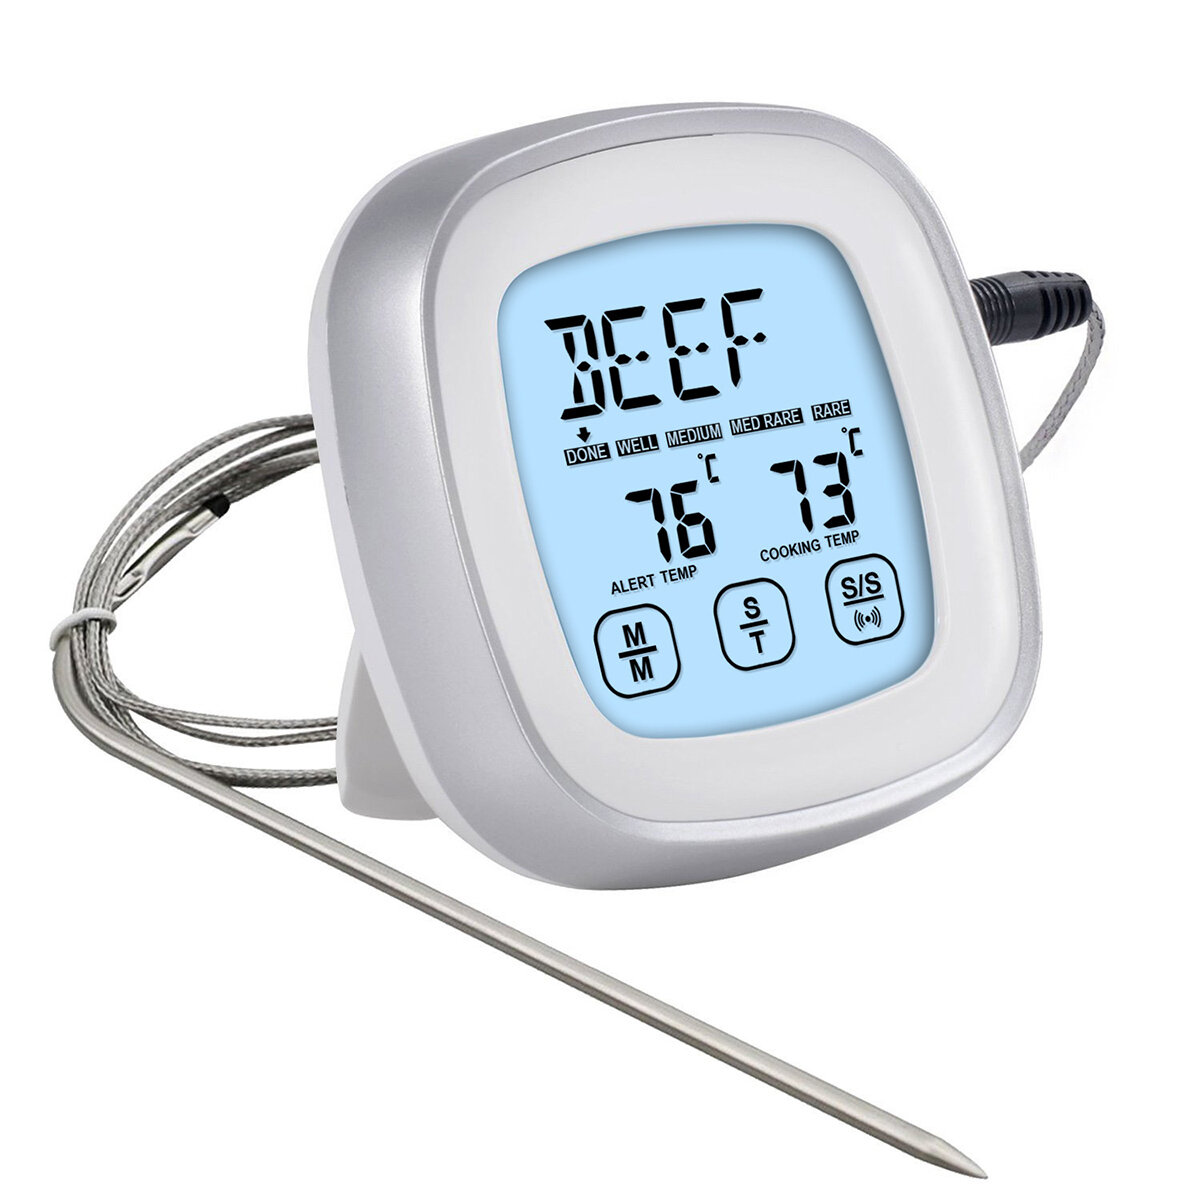 

Barbeque Digital Thermometer Meat Food Cooking Smoker Oven Grill Thermometer ABS BBQ Thermometer for Outdoor Picnic Cook